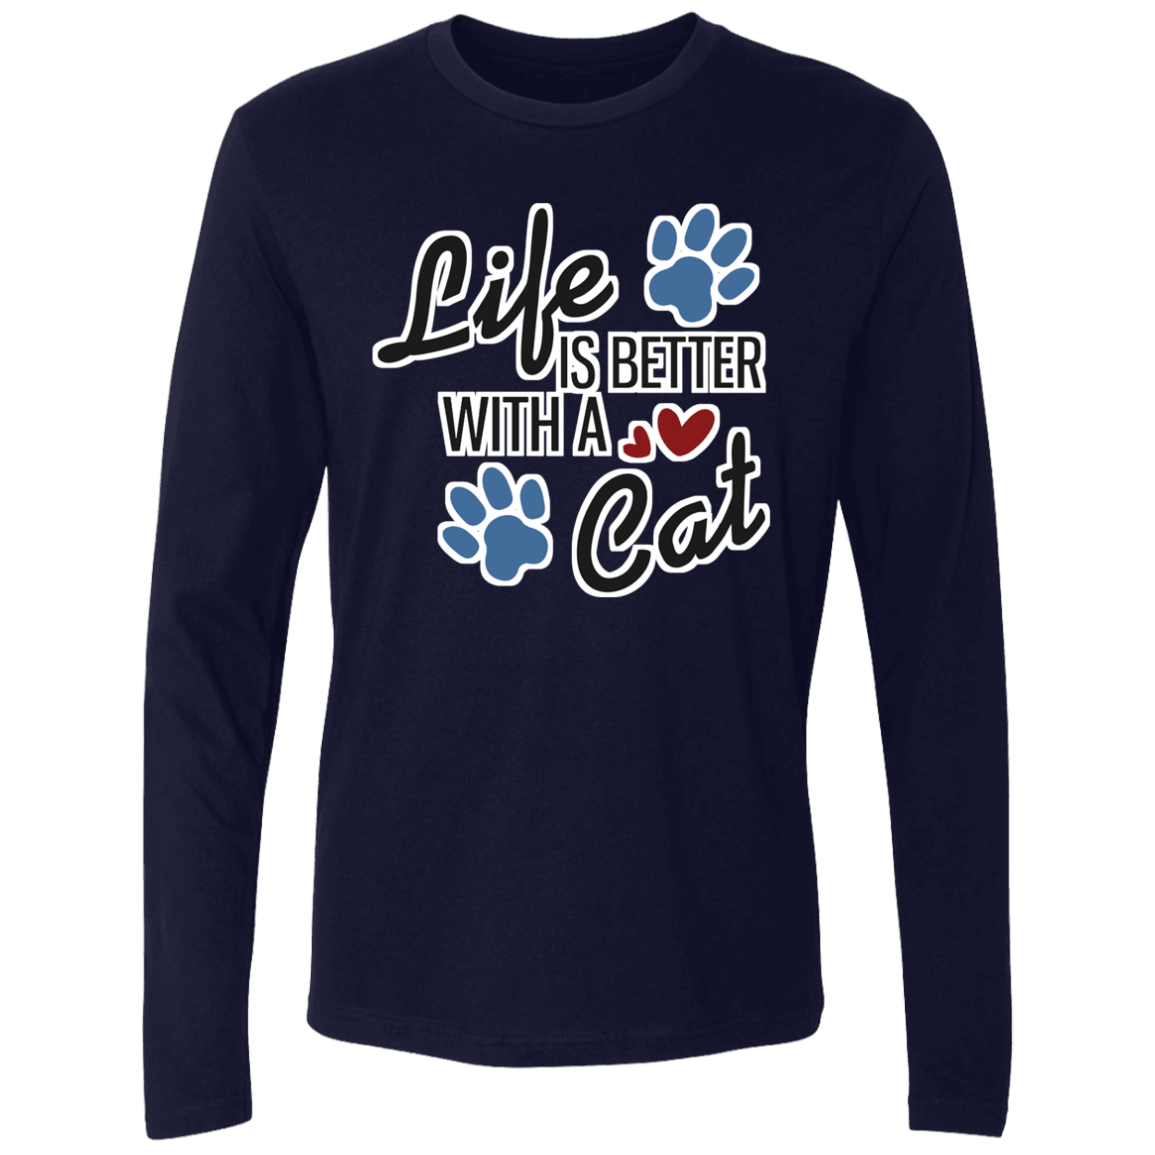 Life is Better with a Cat - Long Sleeve T Shirt.